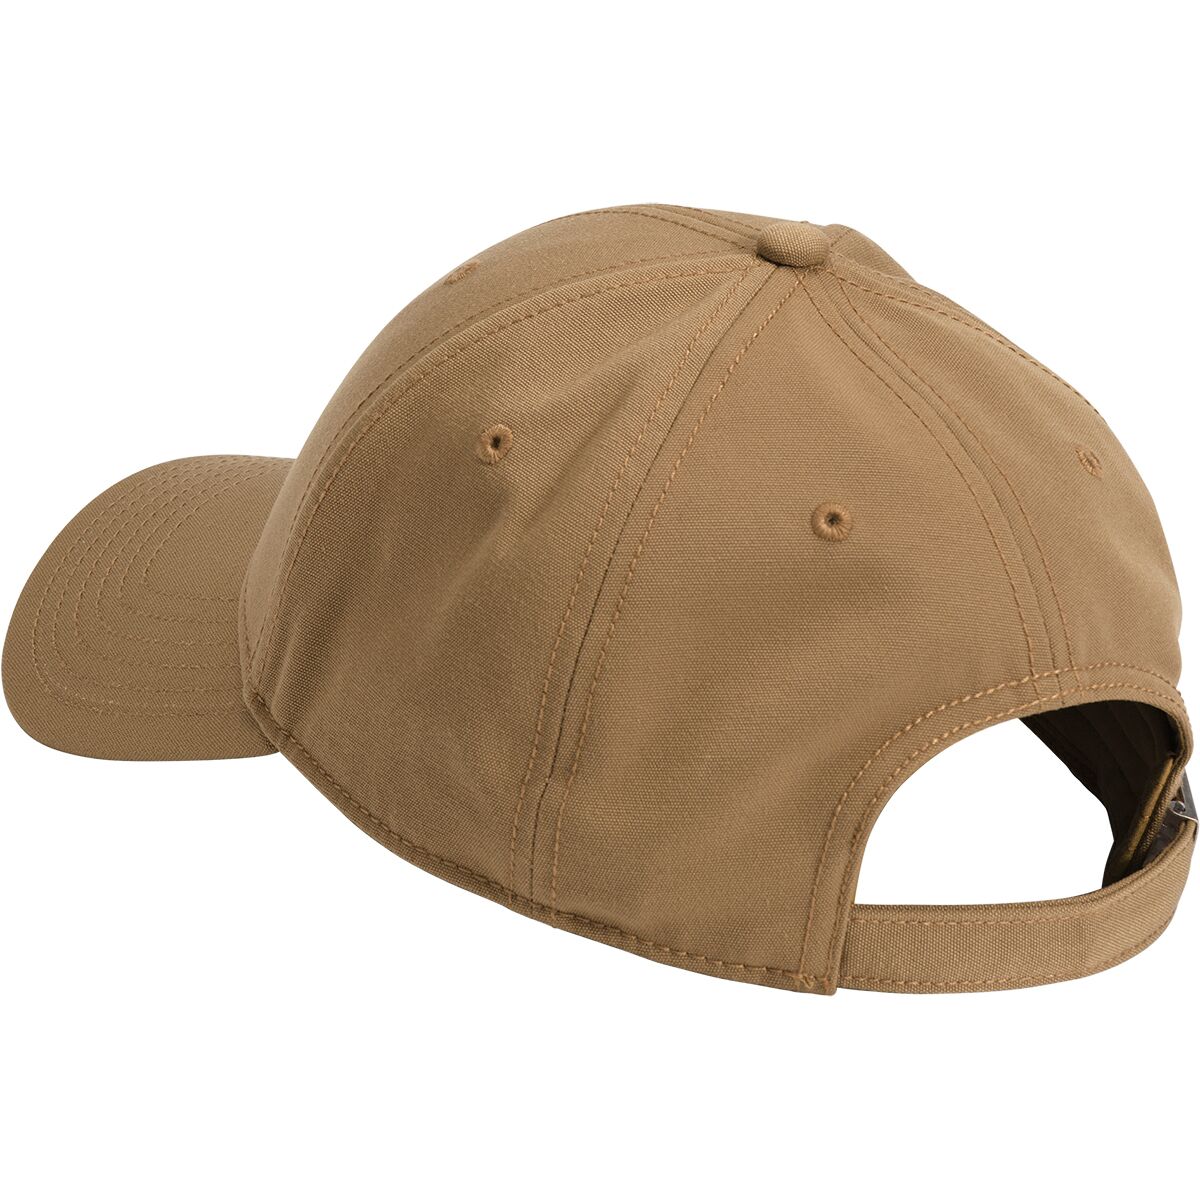 Accessories Classic The Recycled Hat 66 - North Face